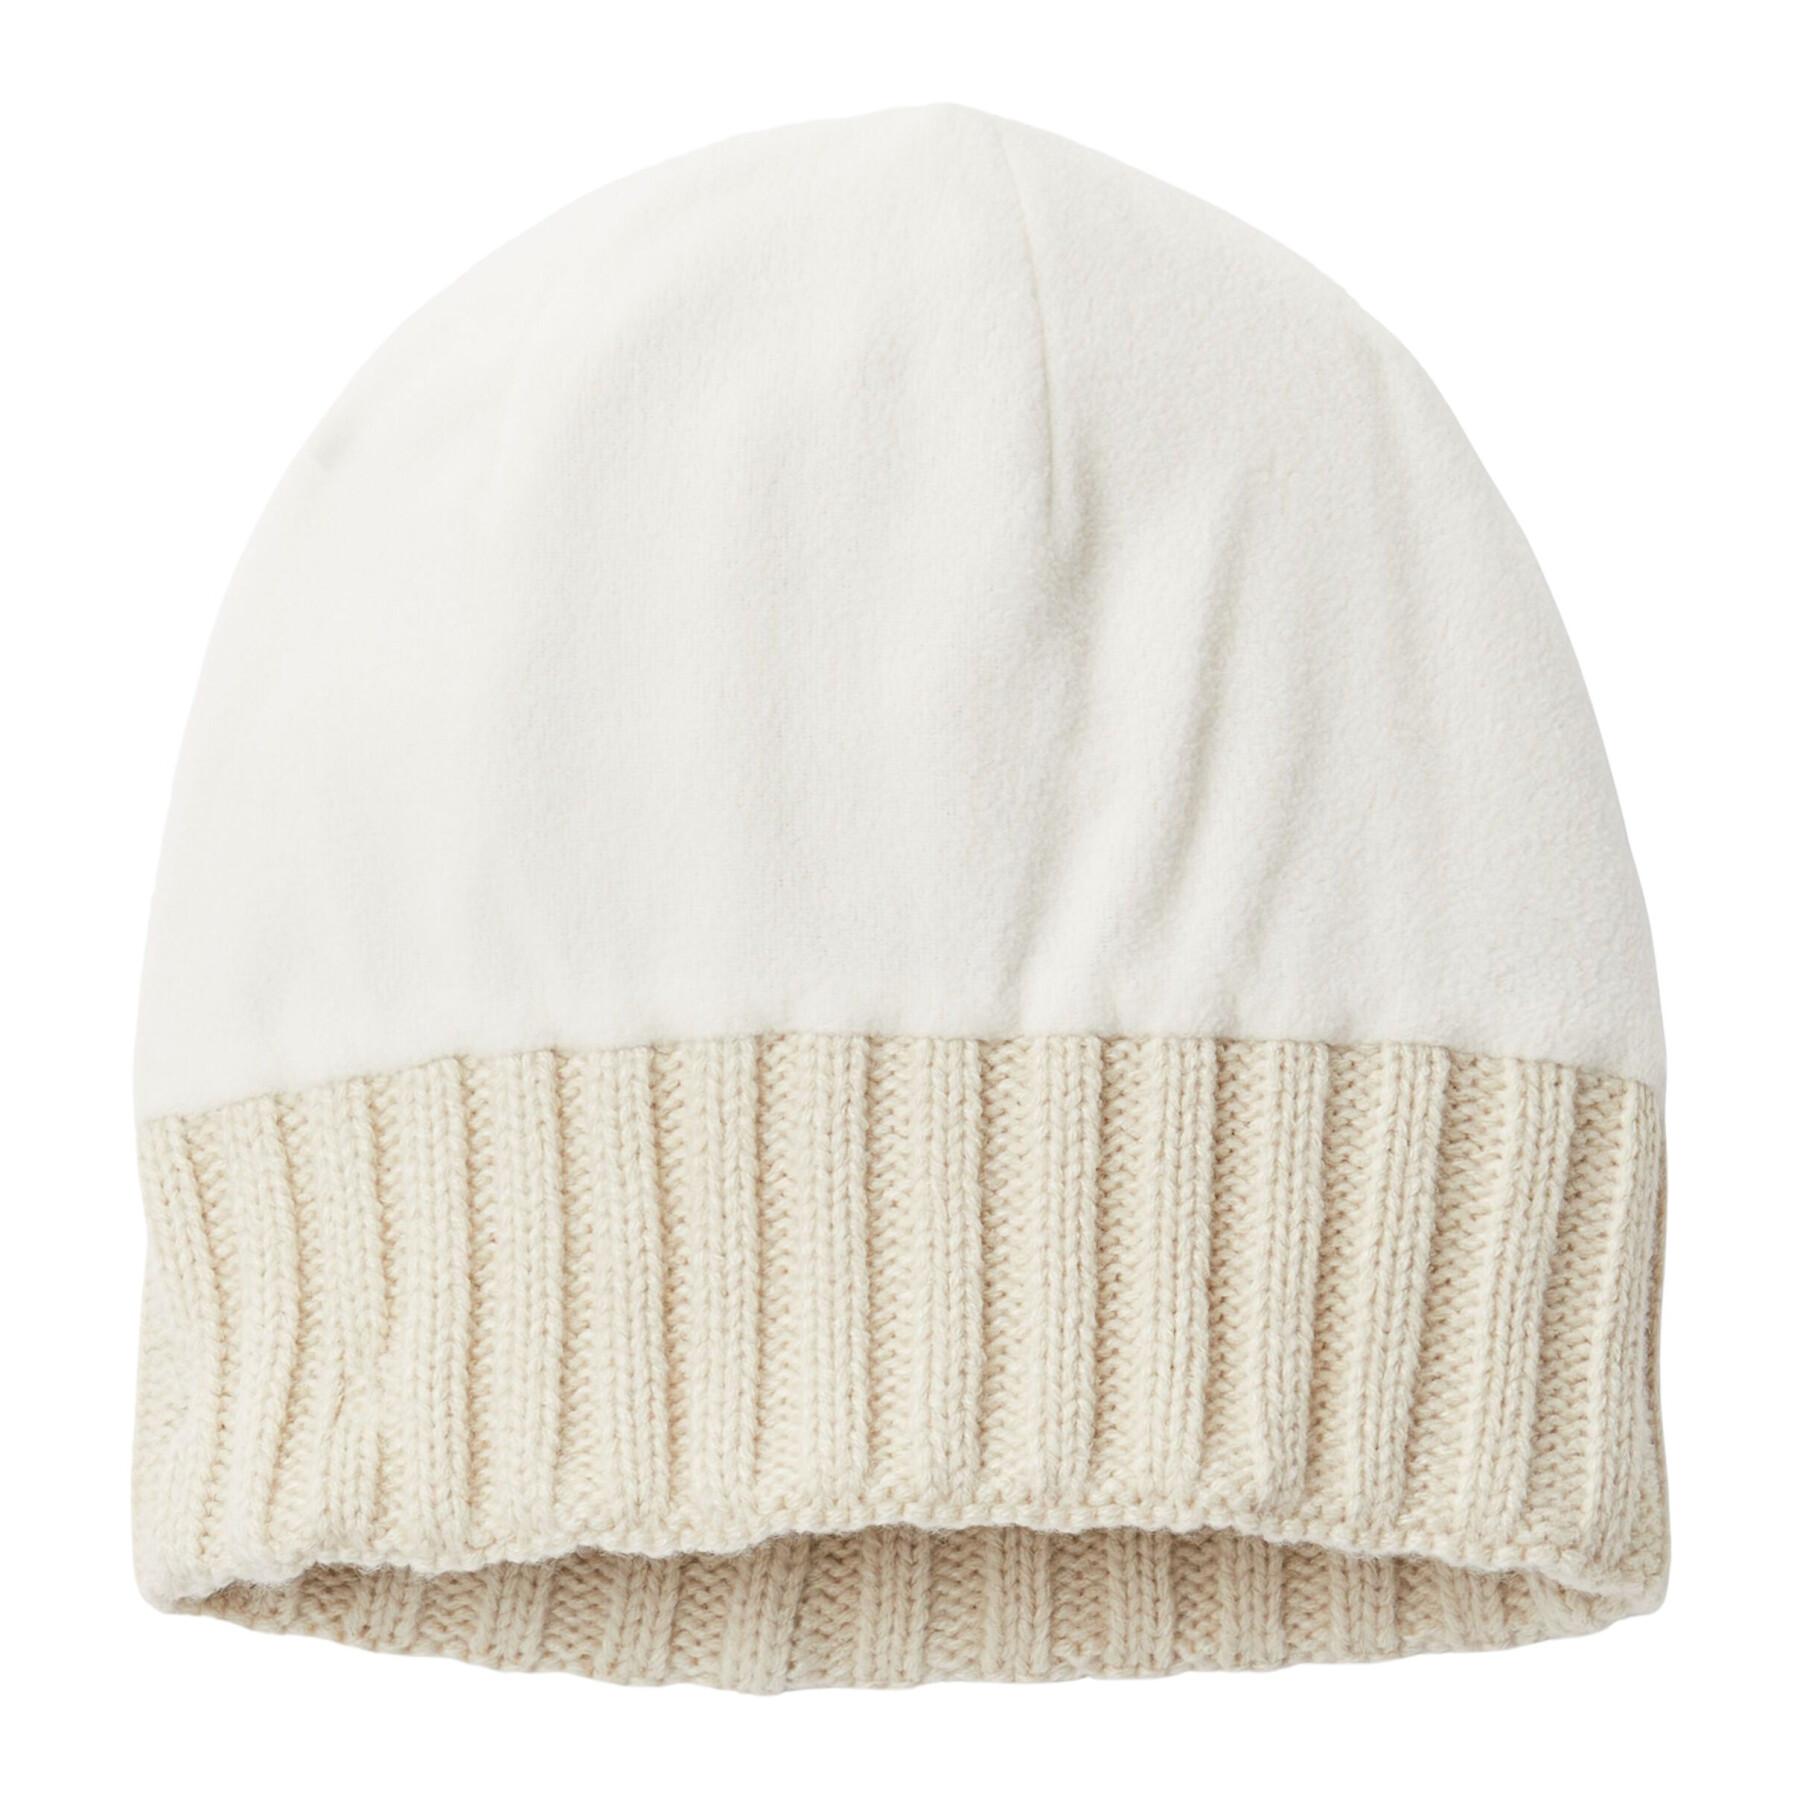 Women's hat Columbia Cabled Cutie II